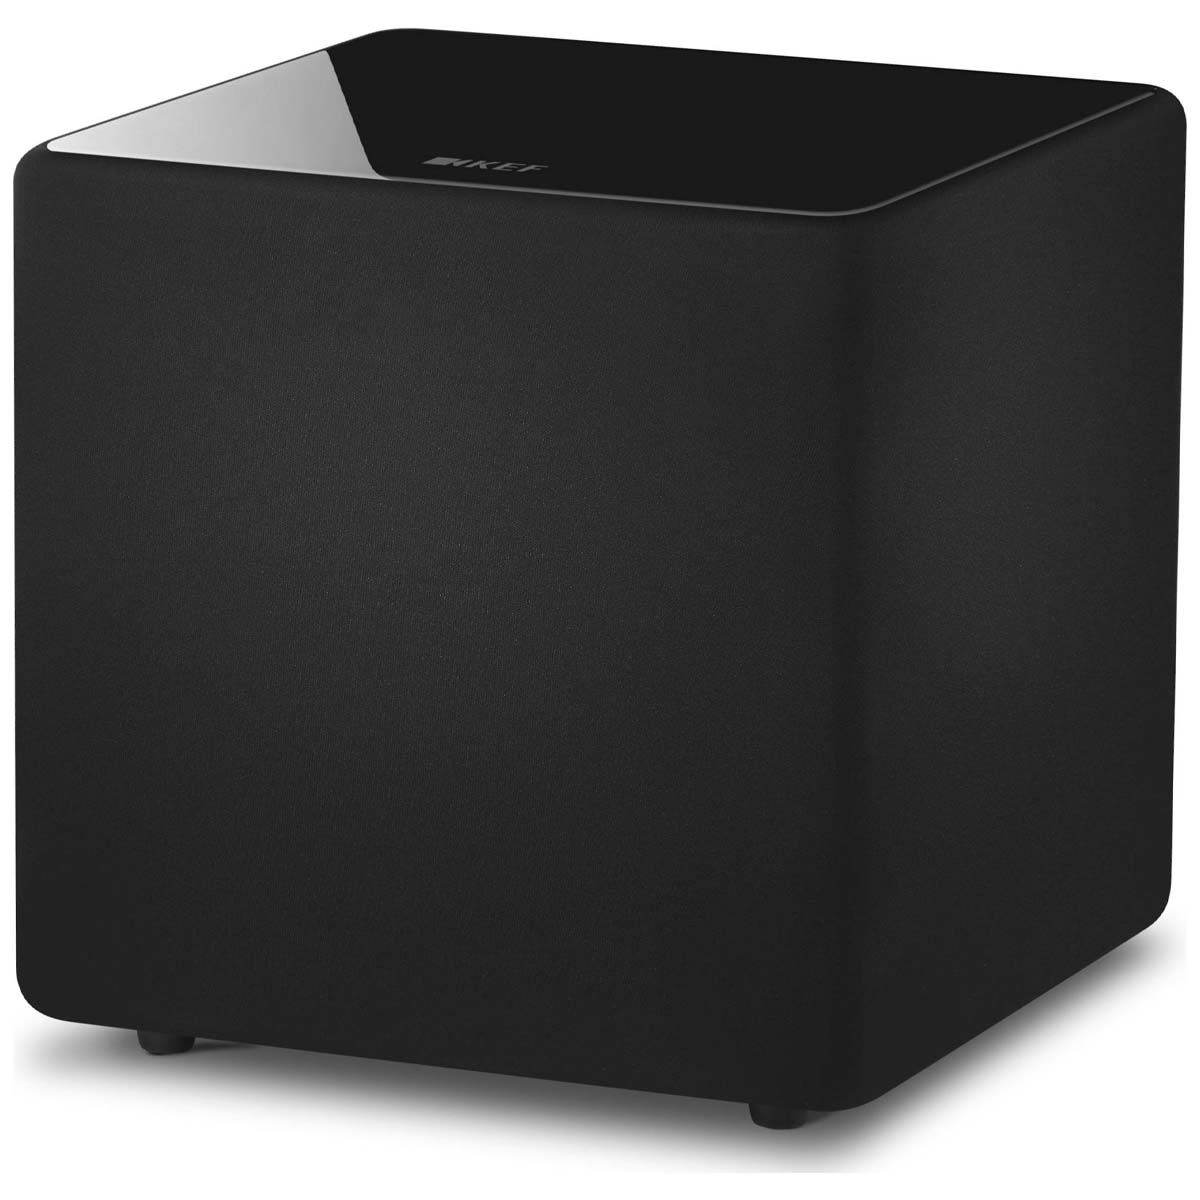 KEF KUBE8b 8-inch Bass Driver Active Subwoofer - Gloss Black - Each - angled front view